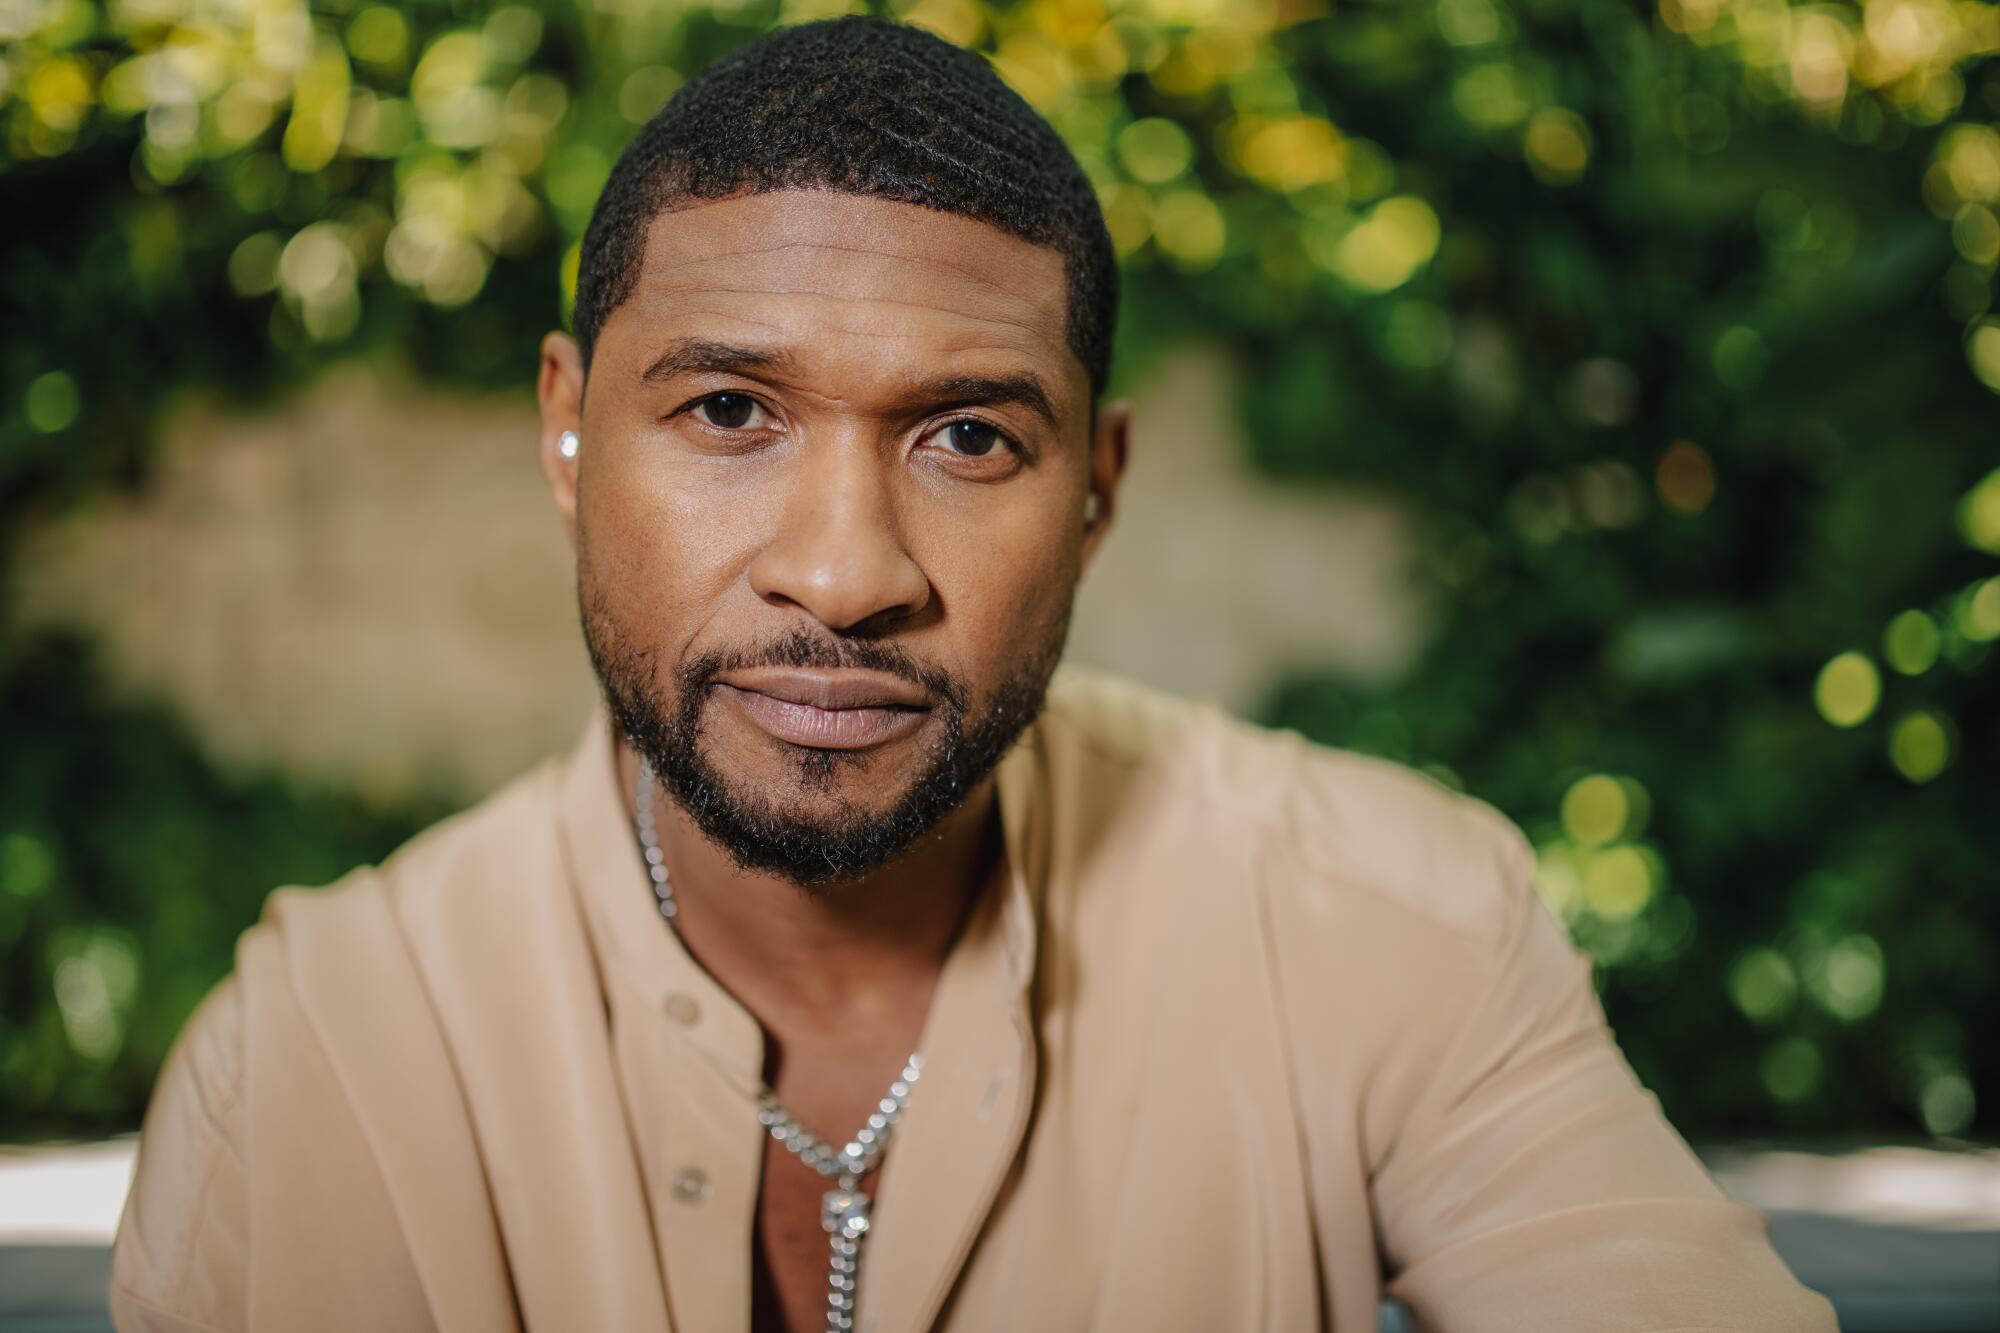 Recently Usher Raymond talks romance in music before taking on the Super Bowl half-time show this Sunday in Las Vegas. “I think that a bit of romance has been taken from music because maybe those songs aren’t as relevant as they used to be,” Usher said. (Mariah Tauger / Los Angeles Times)